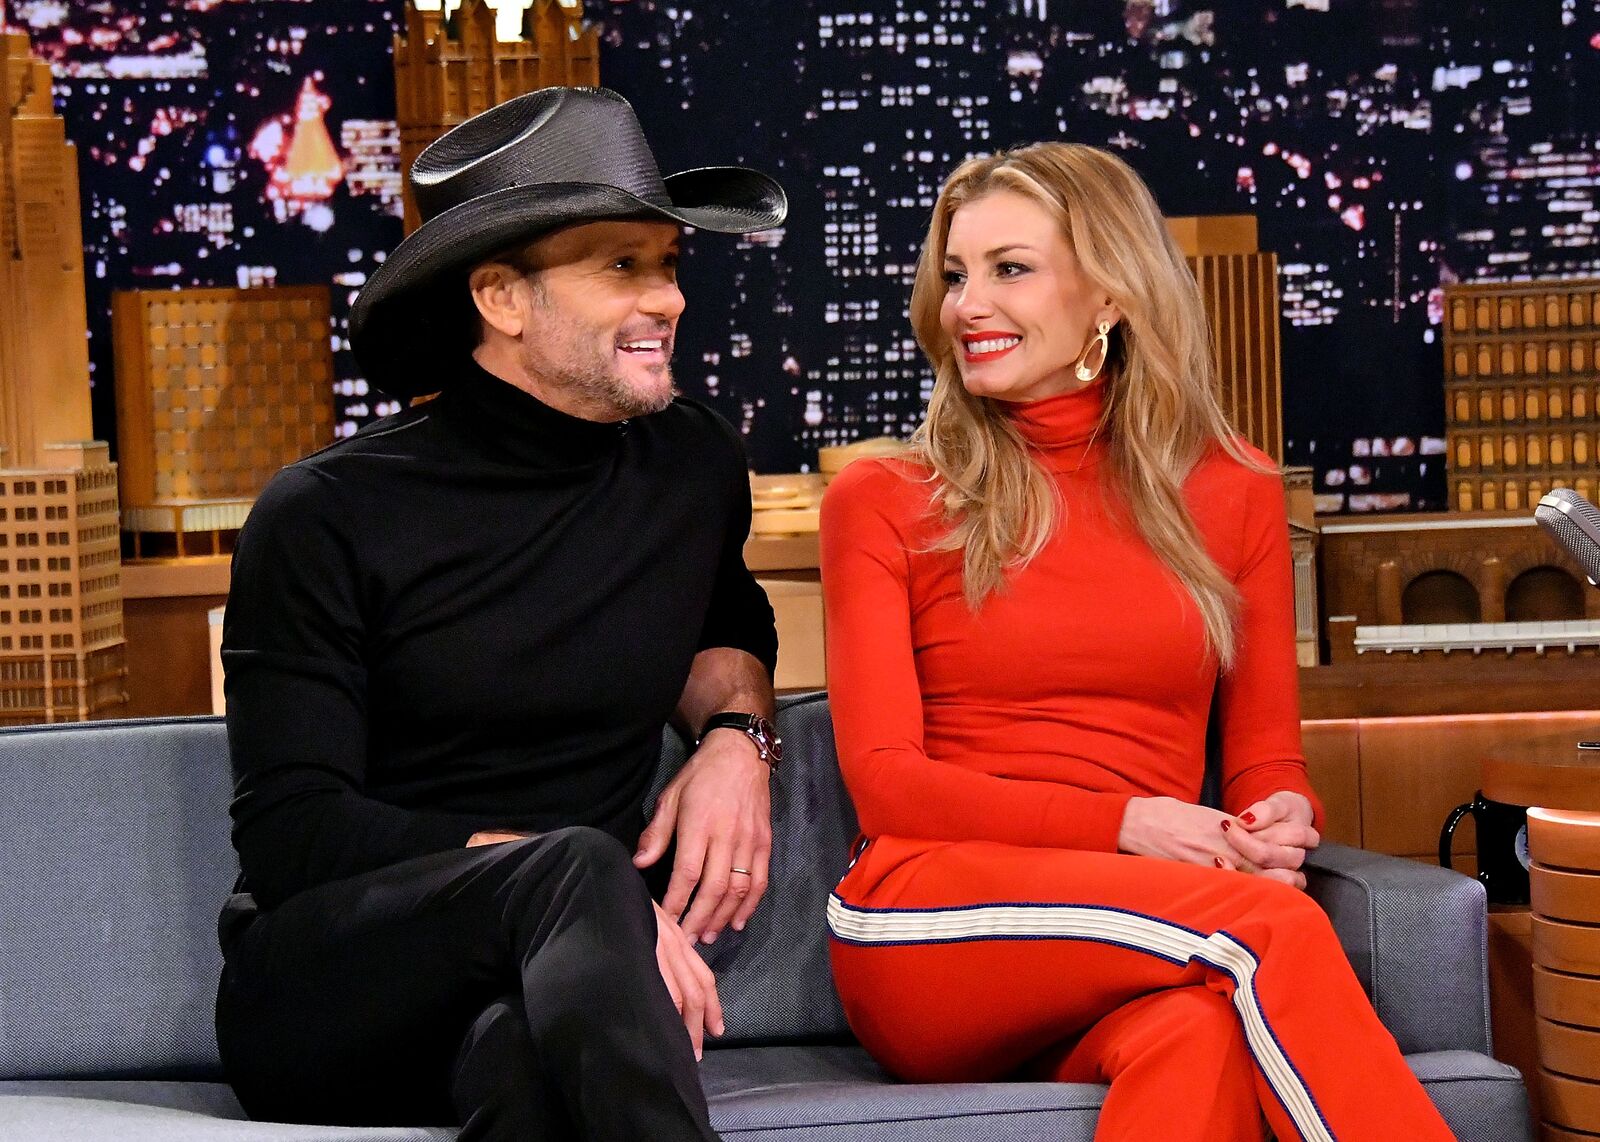 Singer/songwriter Tim McGraw (L) and wife/singer Faith Hill are interviewed on "The Tonight Show Starring Jimmy Fallon" at Rockefeller Center on November 16, 2017 in New York City | Photo: Getty Images